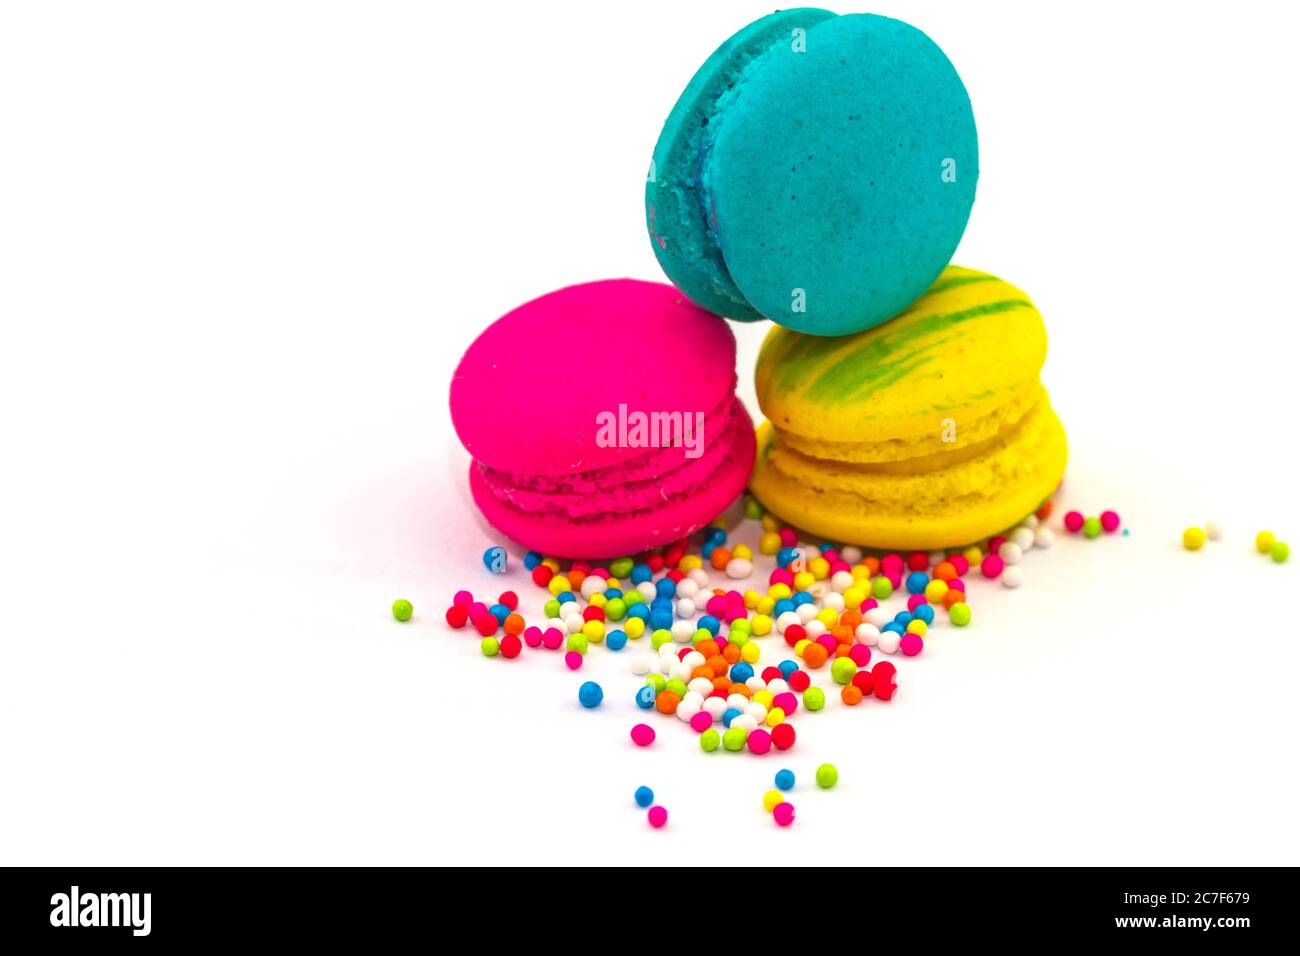 Sweet and colourful french macaroons or macaron  isolated on white backgroud with sugar topping. Stock Photo